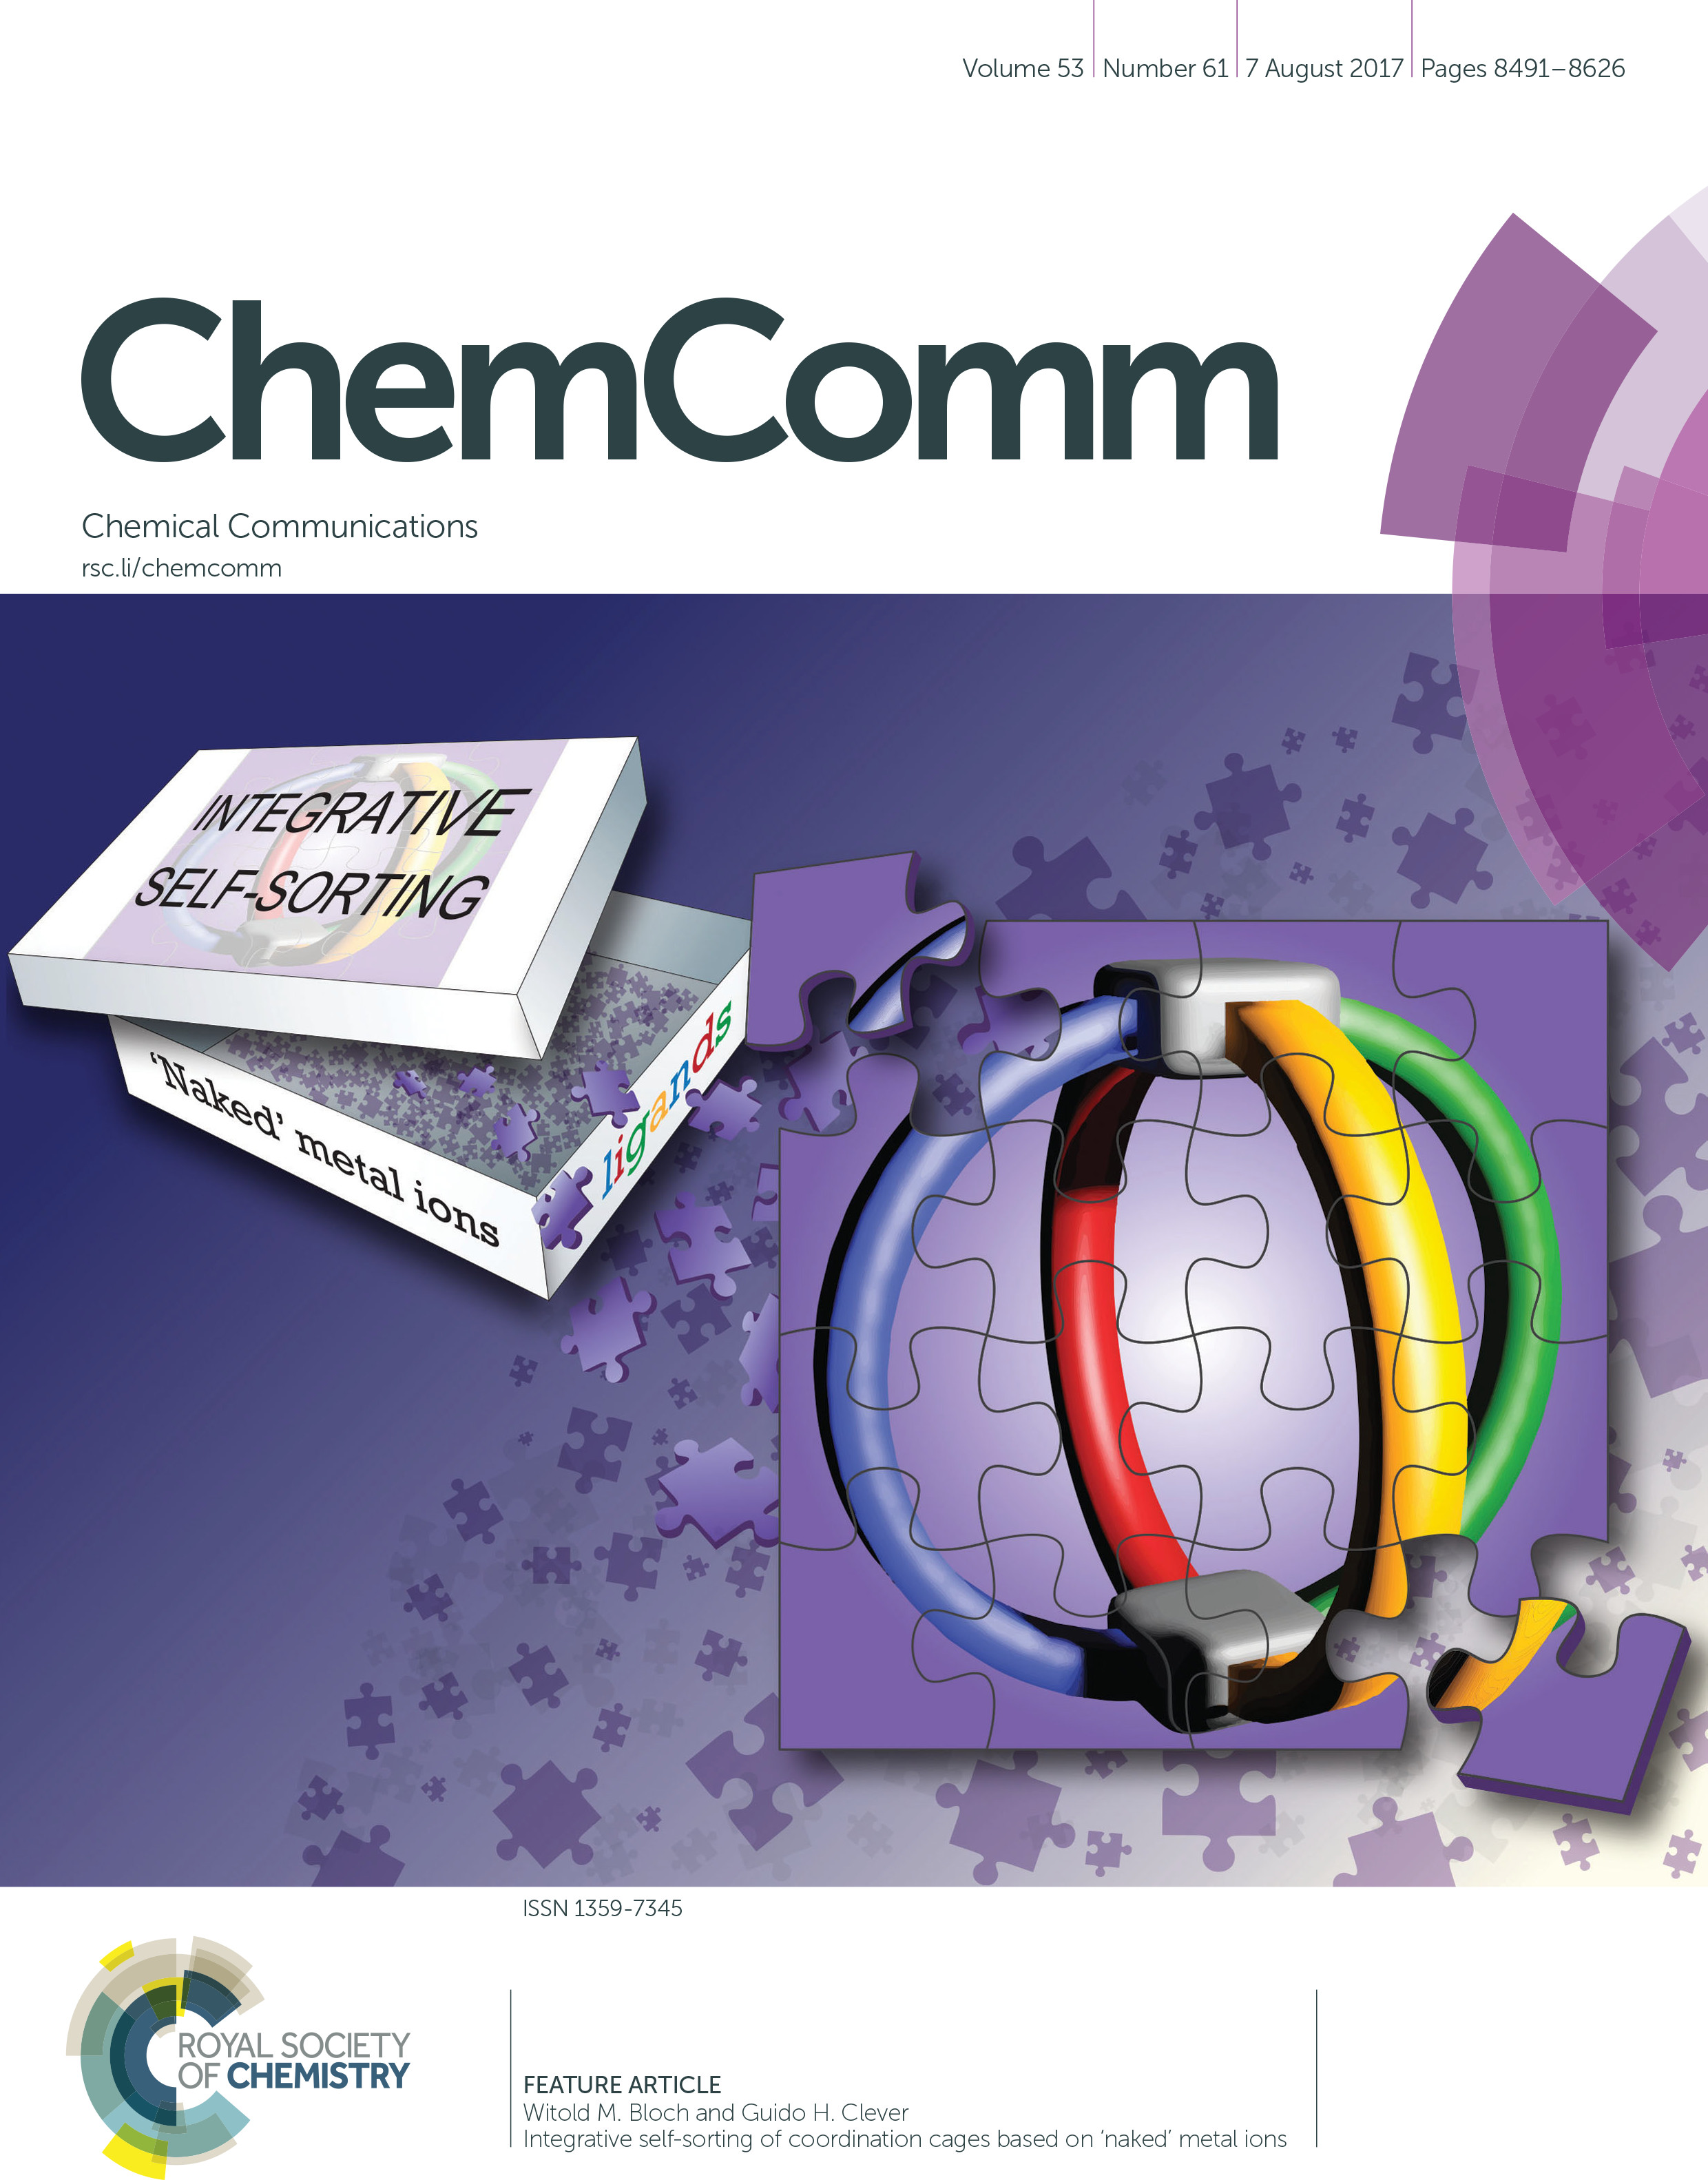 Feature article in Chem. Commun. 2017, 53, 8506